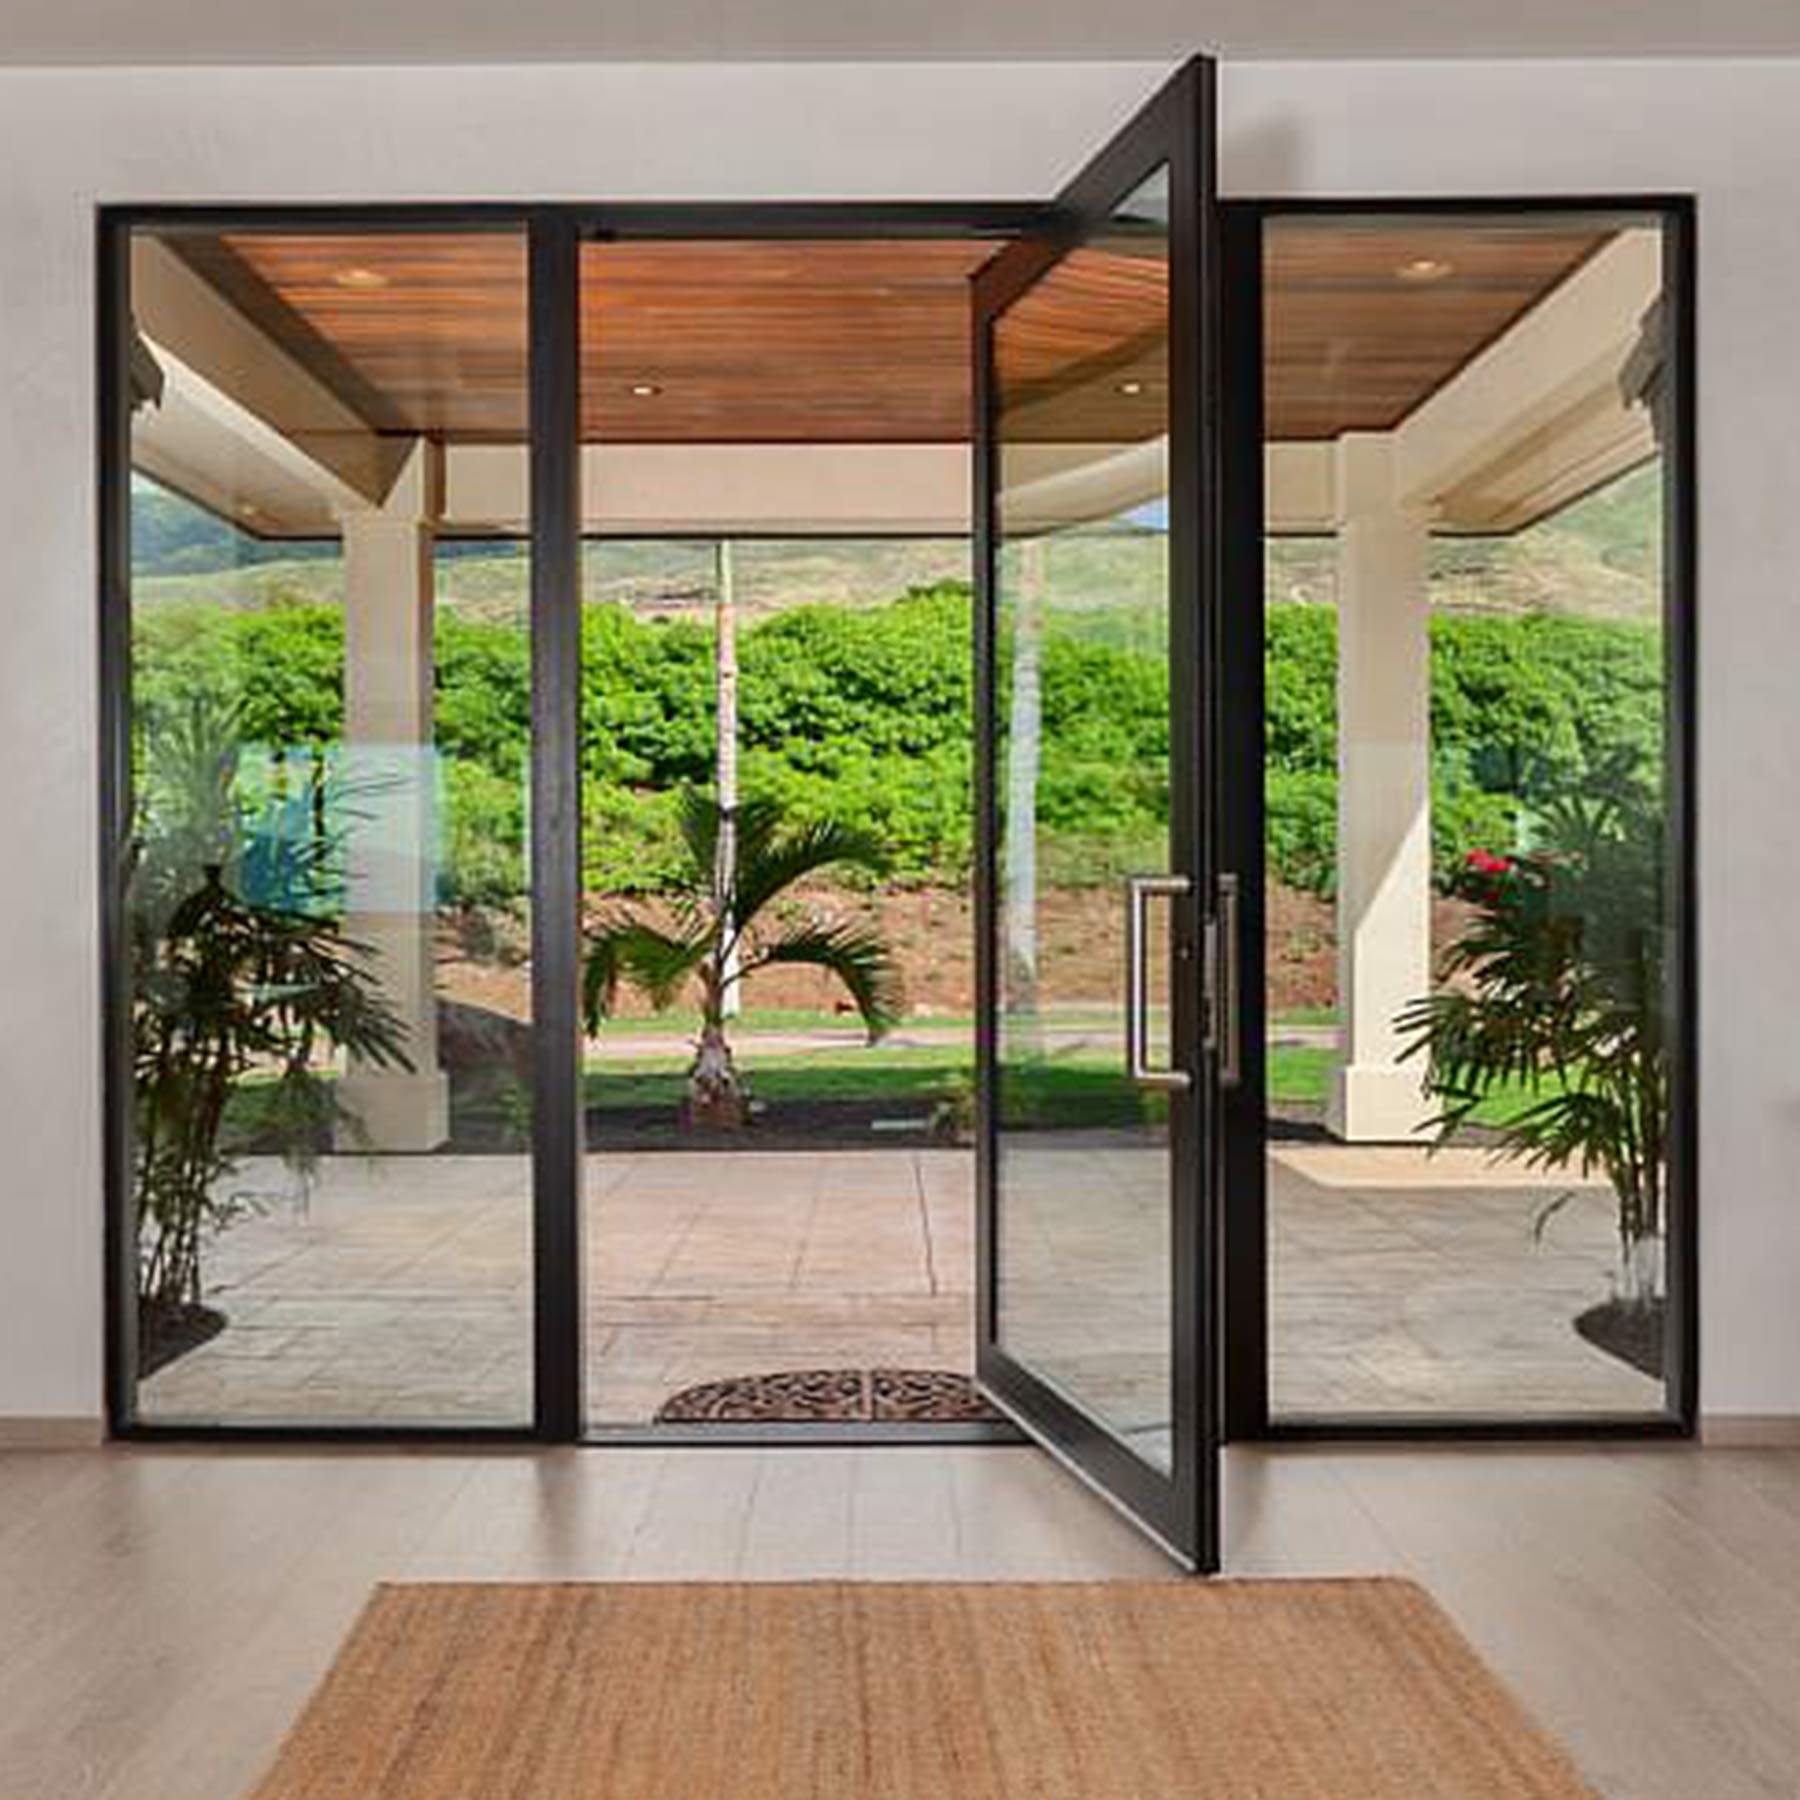 gloryirondoors simple design iron frame glass pivot door with two sidelights